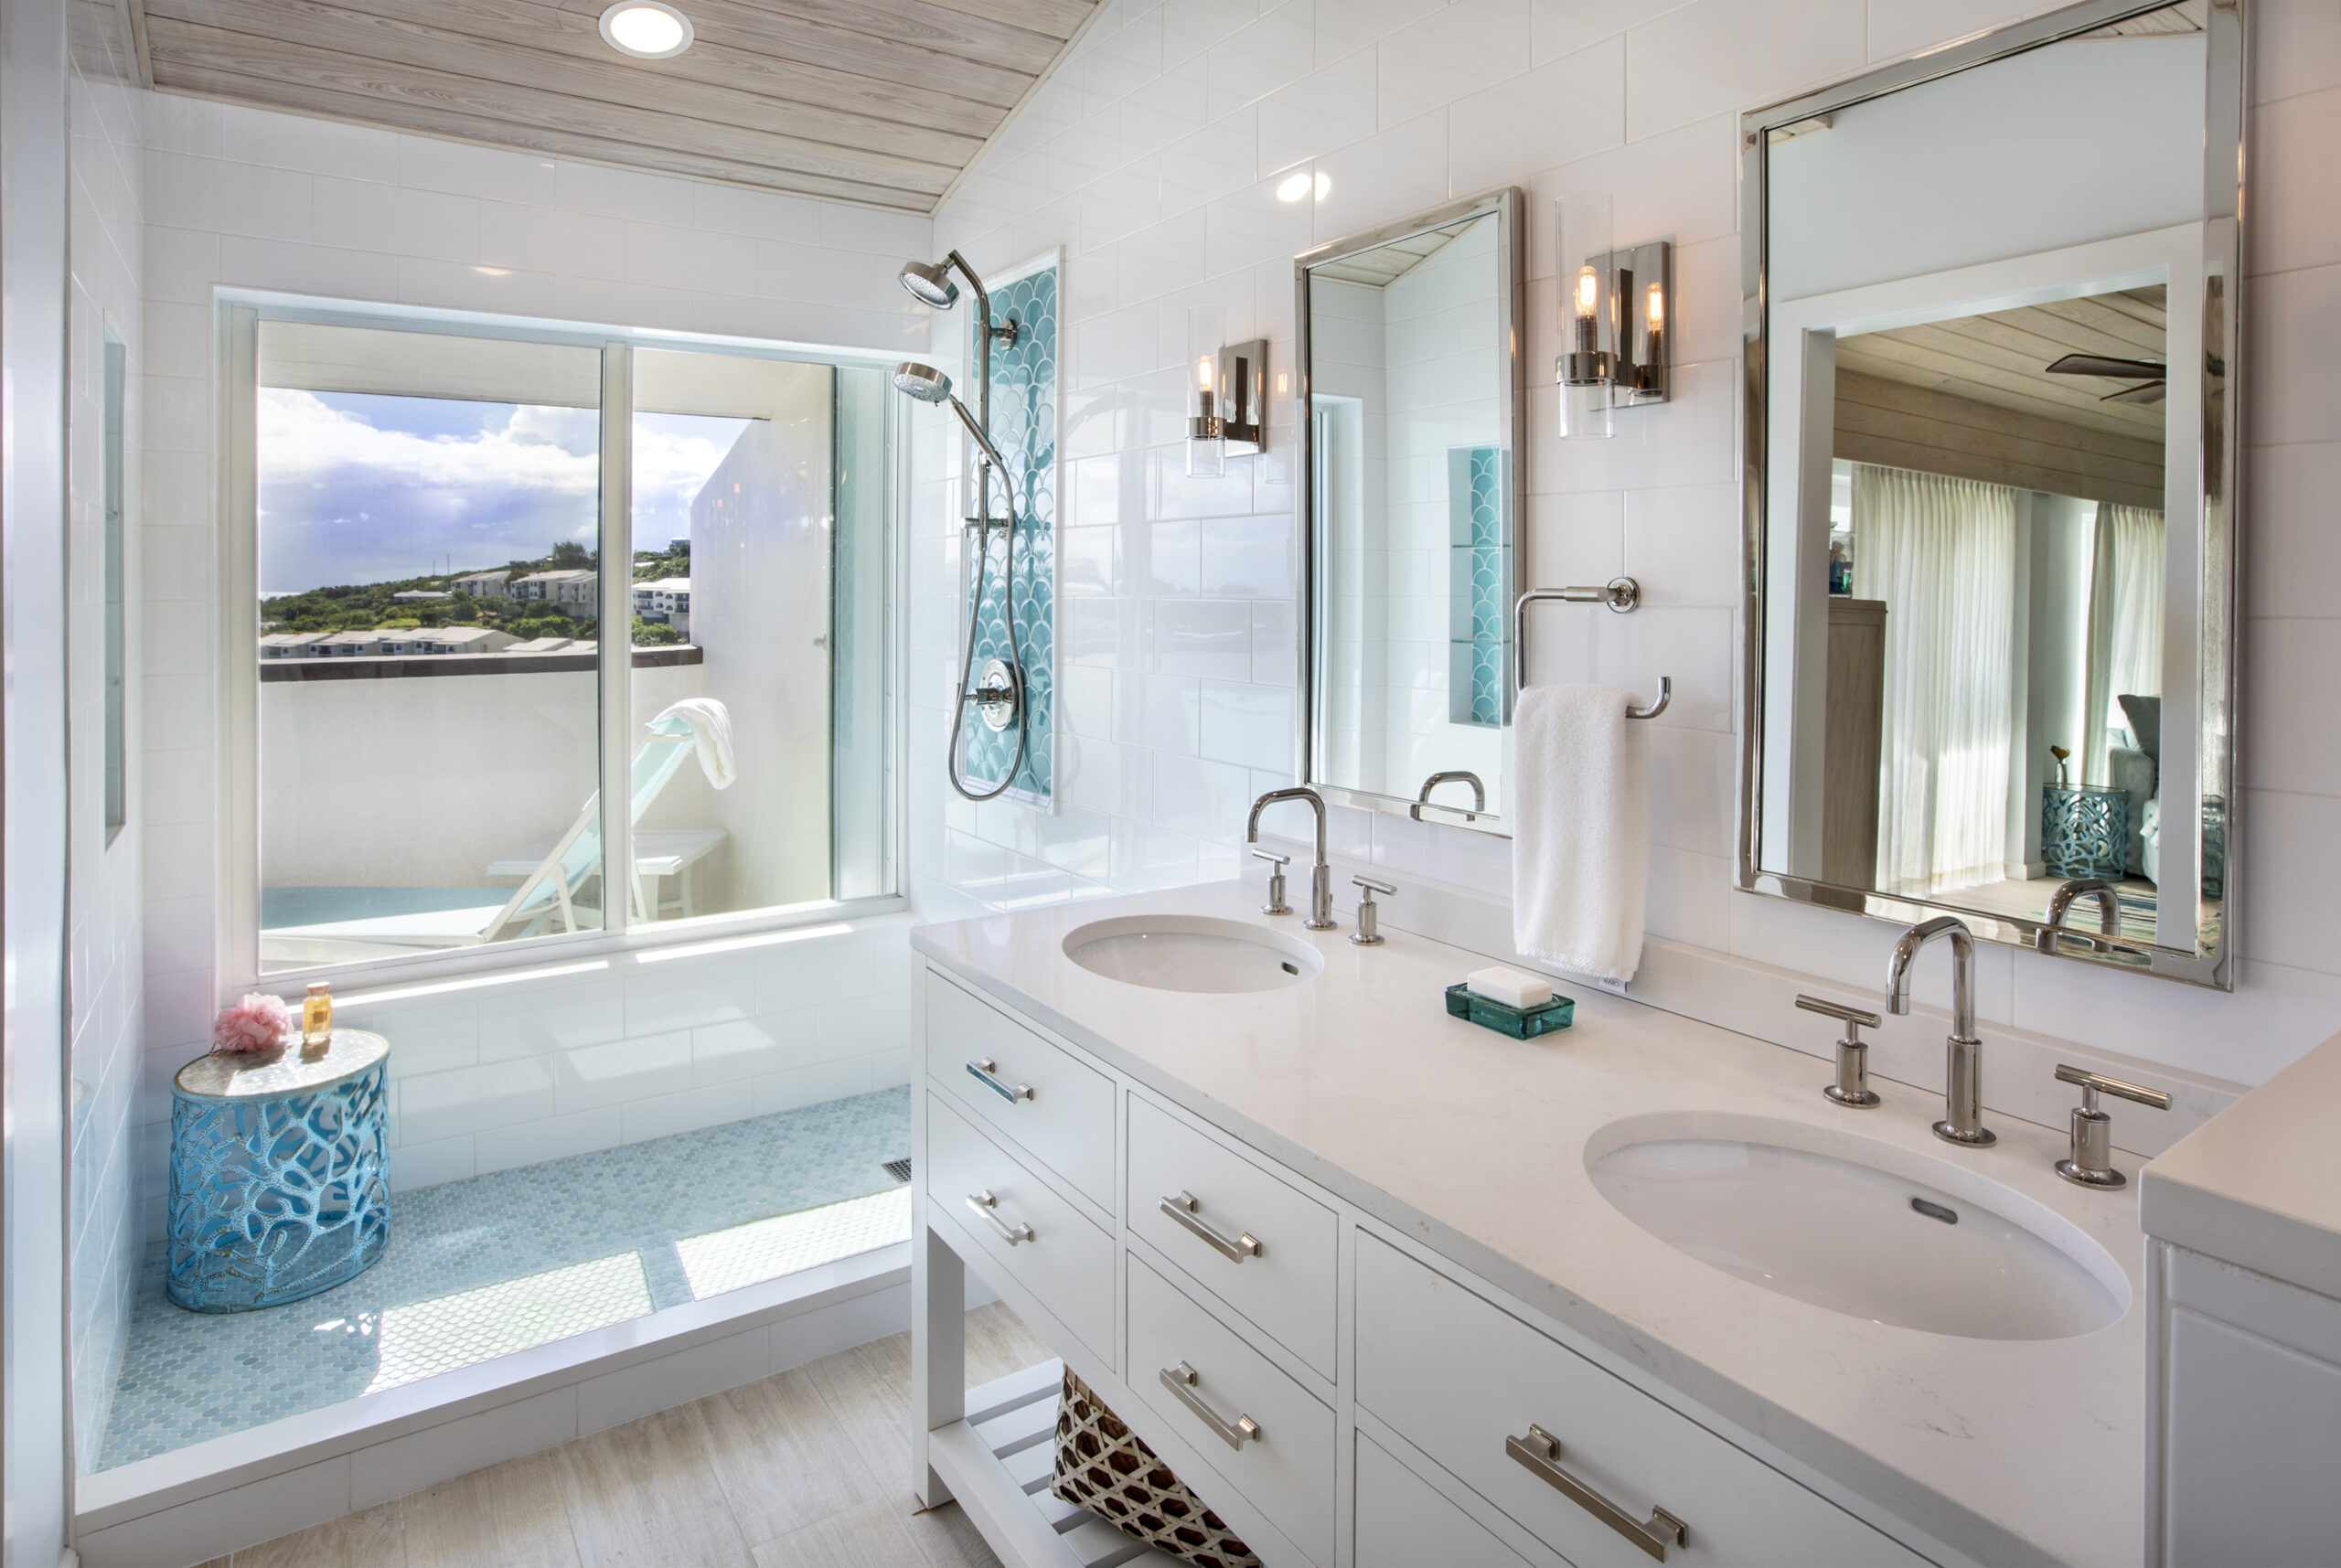 St. Thomas Vacation Rental Bathroom with Deck Space